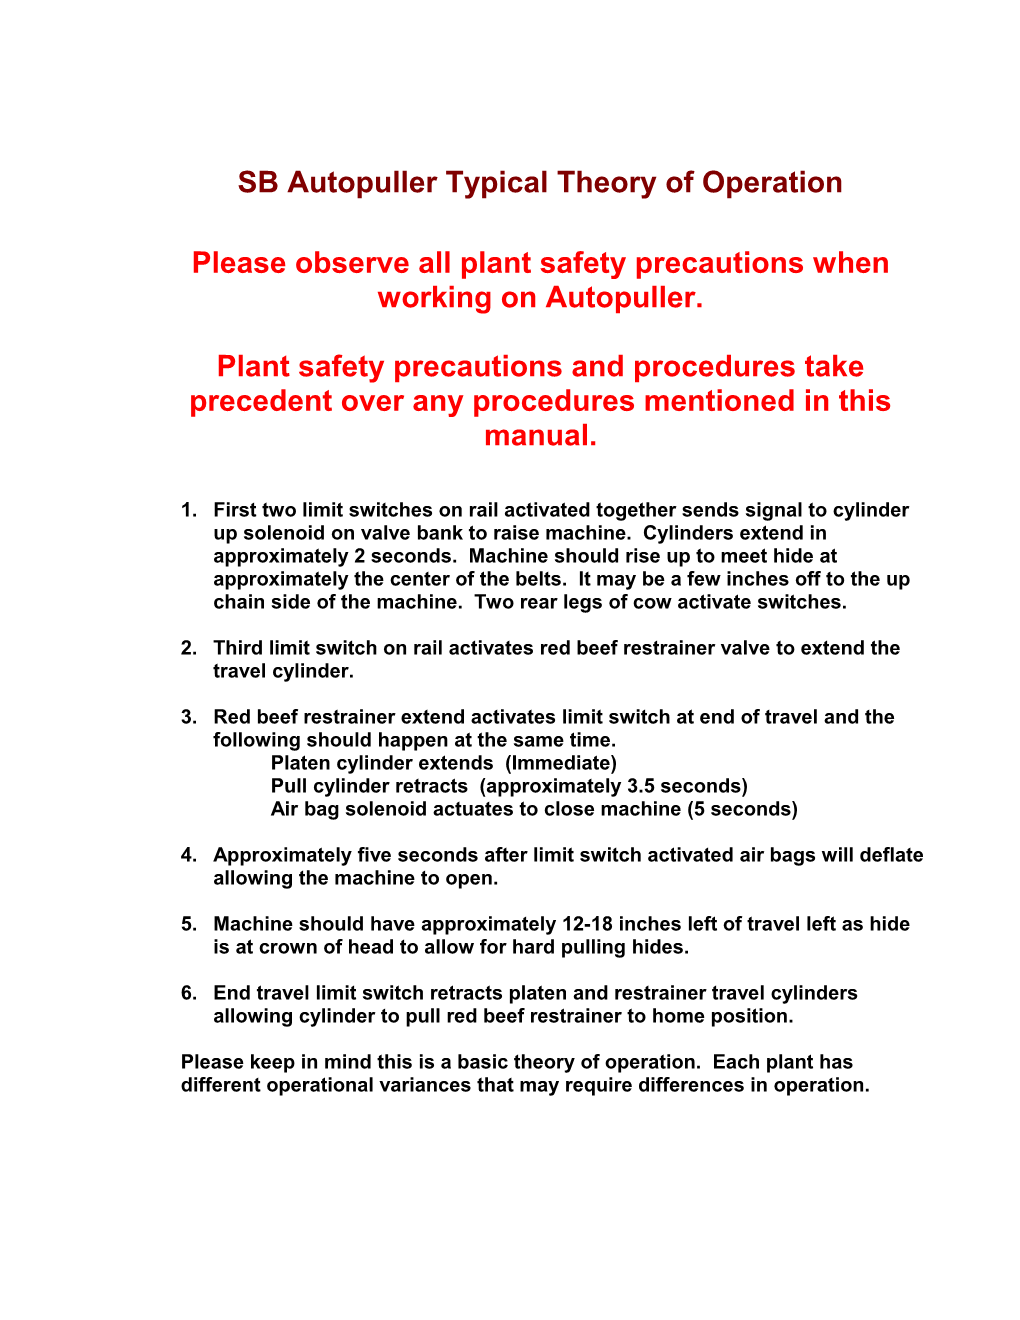 Autopuller Theory of Operation